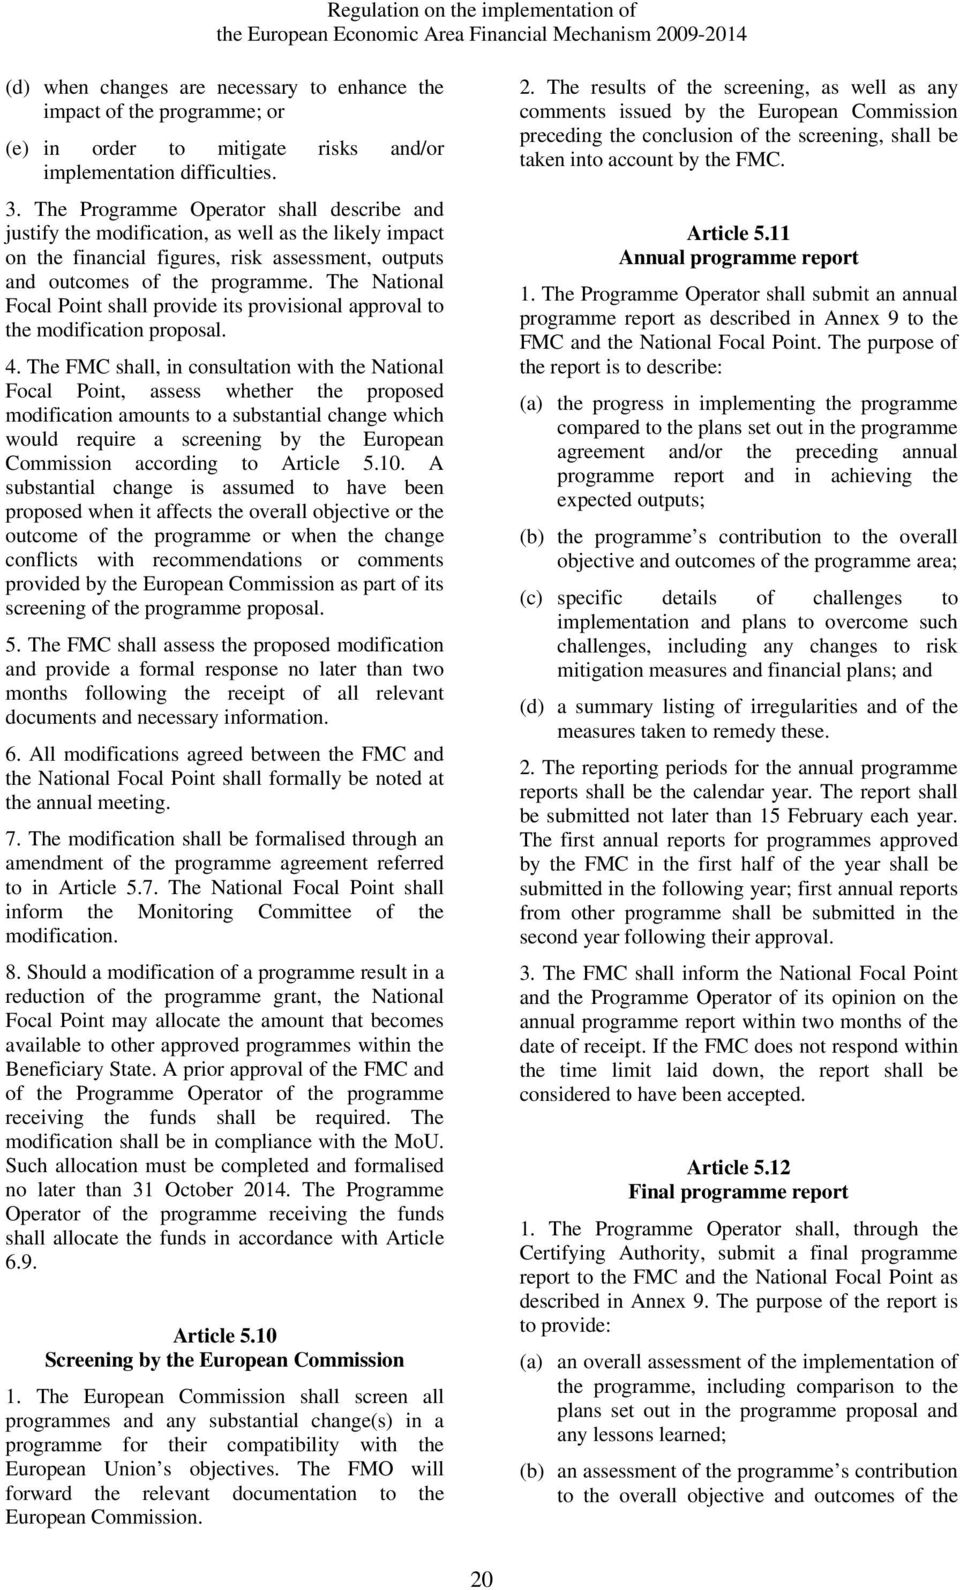 The National Focal Point shall provide its provisional approval to the modification proposal. 4.